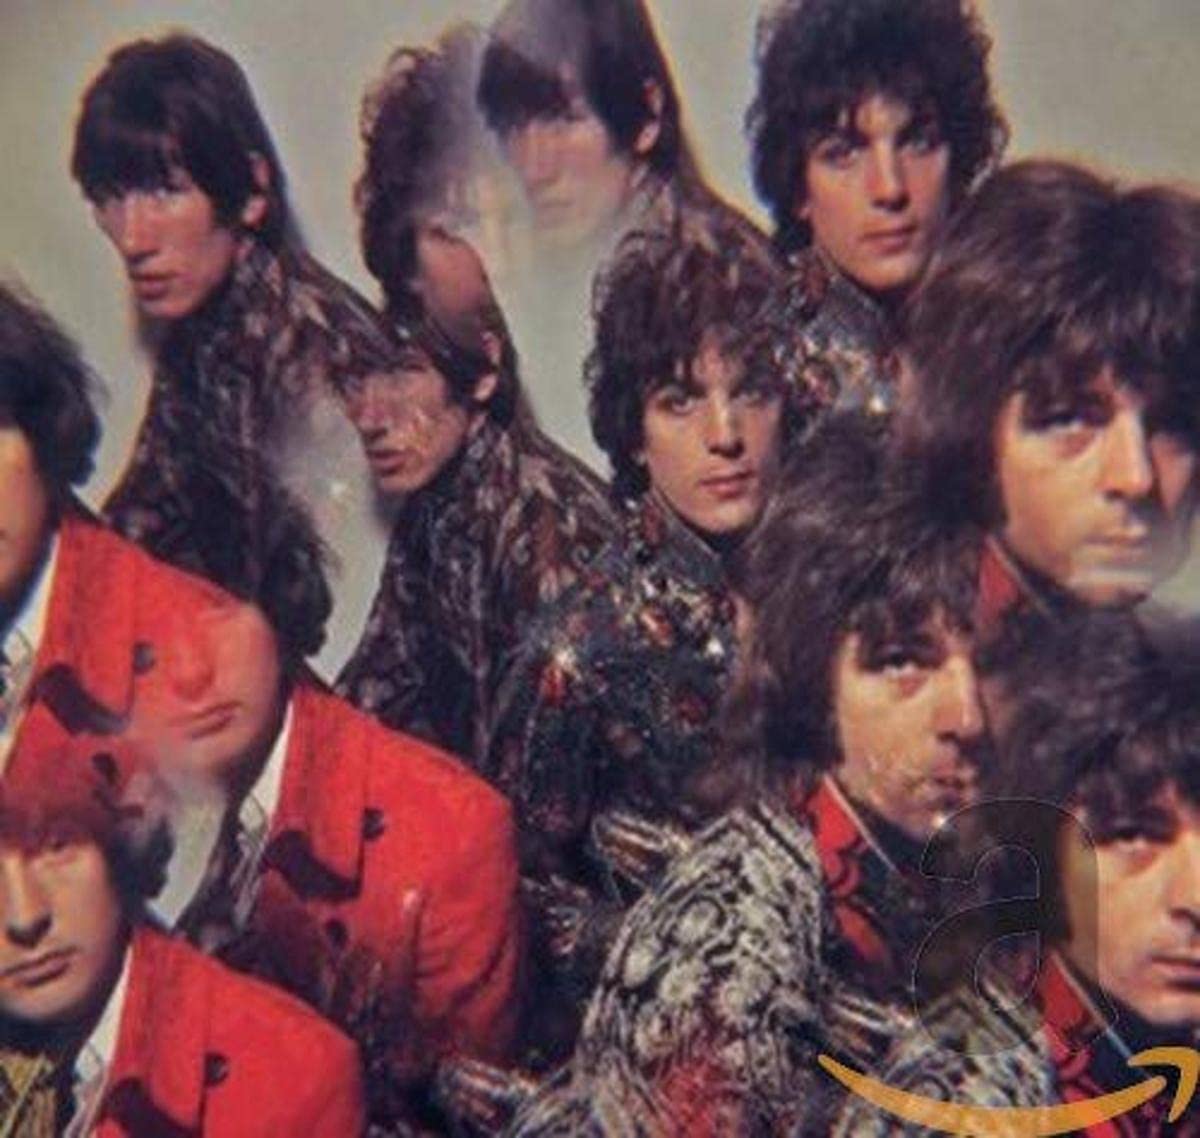 Pink Floyd - The Piper At The Gates of Dawn (Mono)